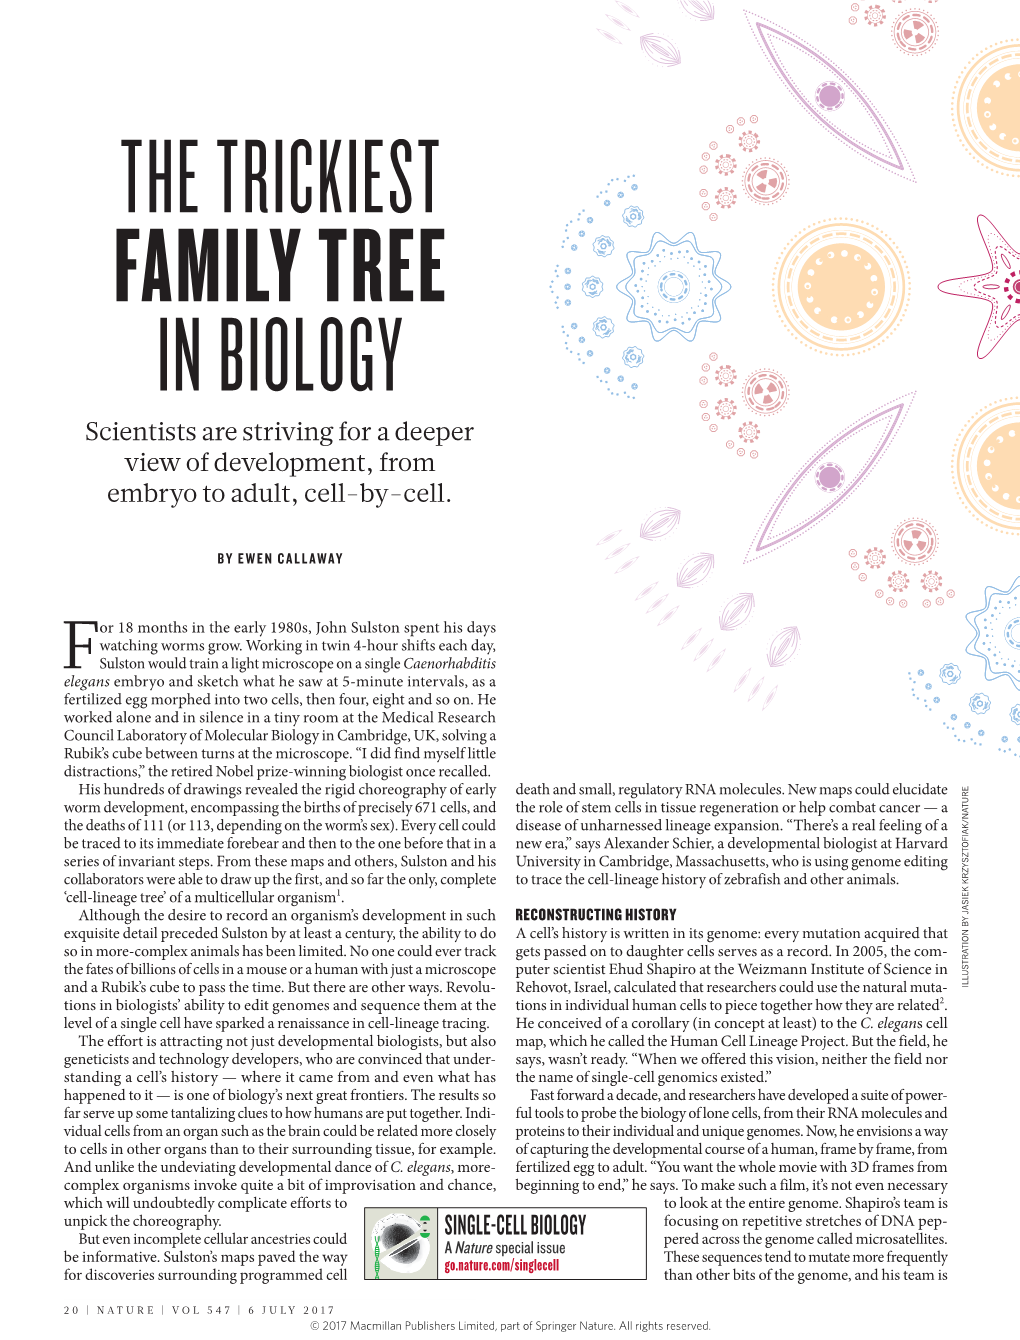 THE TRICKIEST FAMILY TREE in BIOLOGY Scientists Are Striving for a Deeper View of Development, from Embryo to Adult, Cell-By-Cell